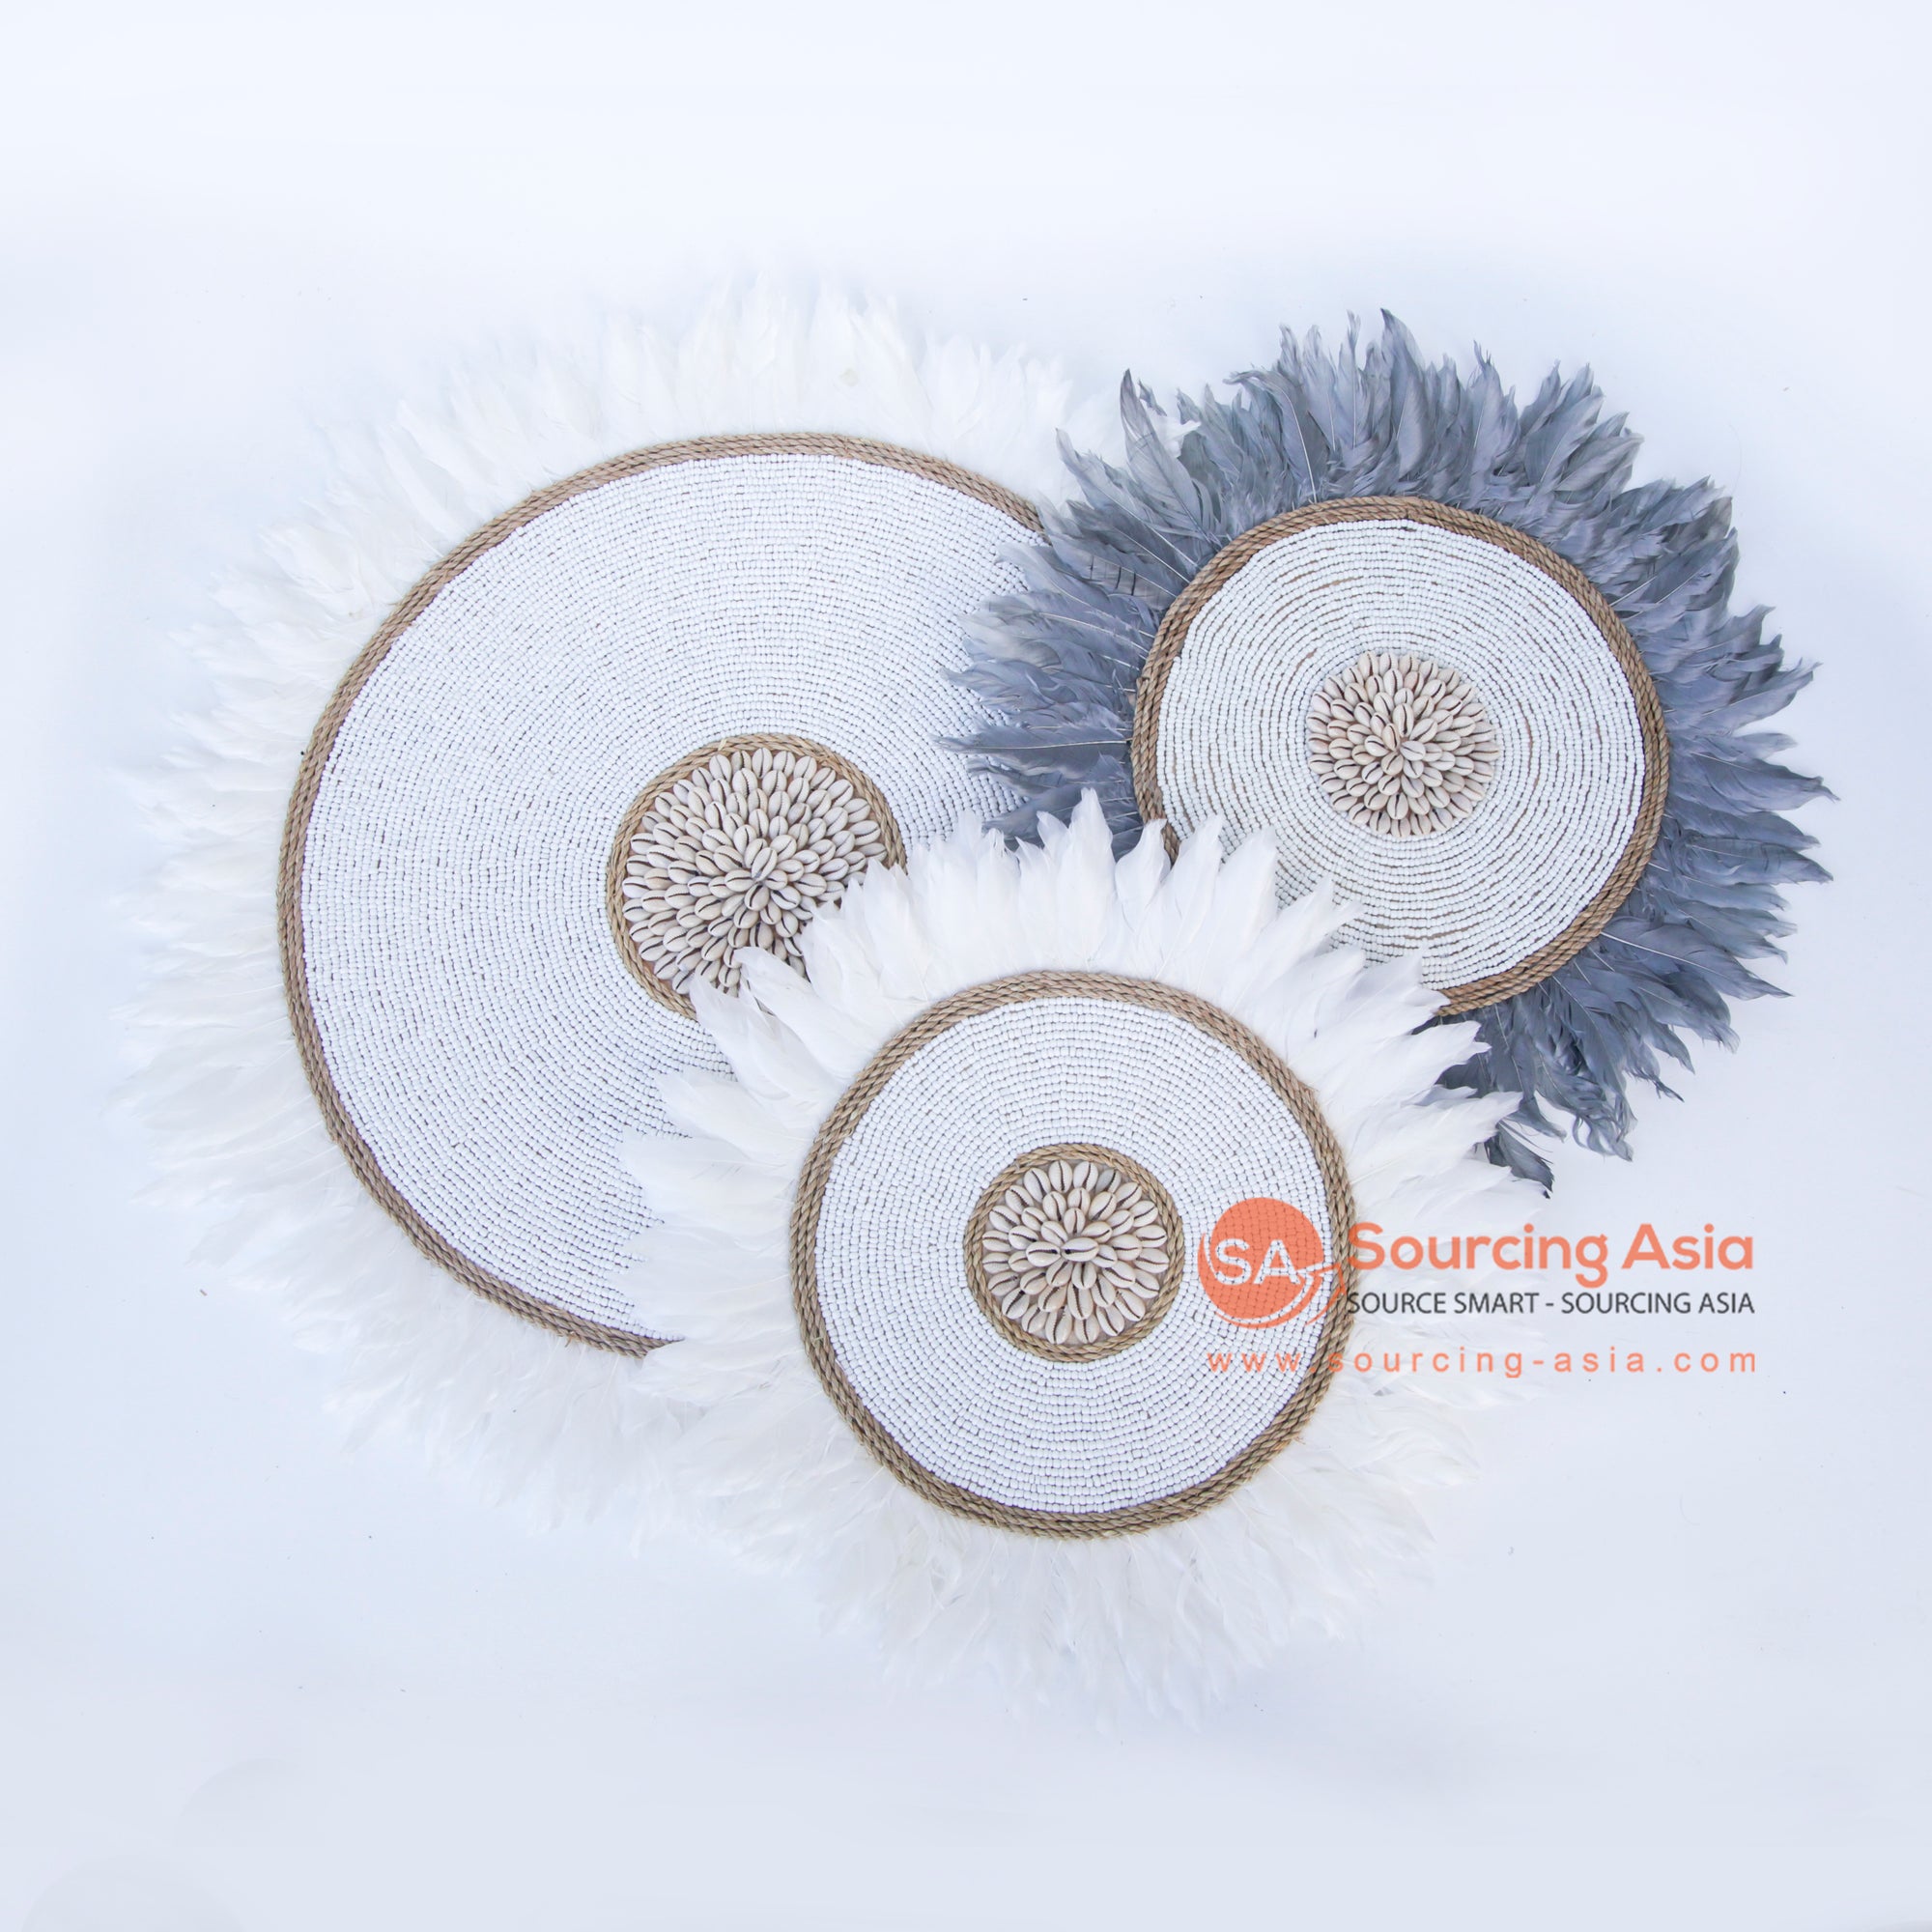 DHL060 SET OF THREE WHITE AND GREY FEATHERS WITH NATURAL BEADS AND SHELL ROUND JUJU WALL DECORATIONS